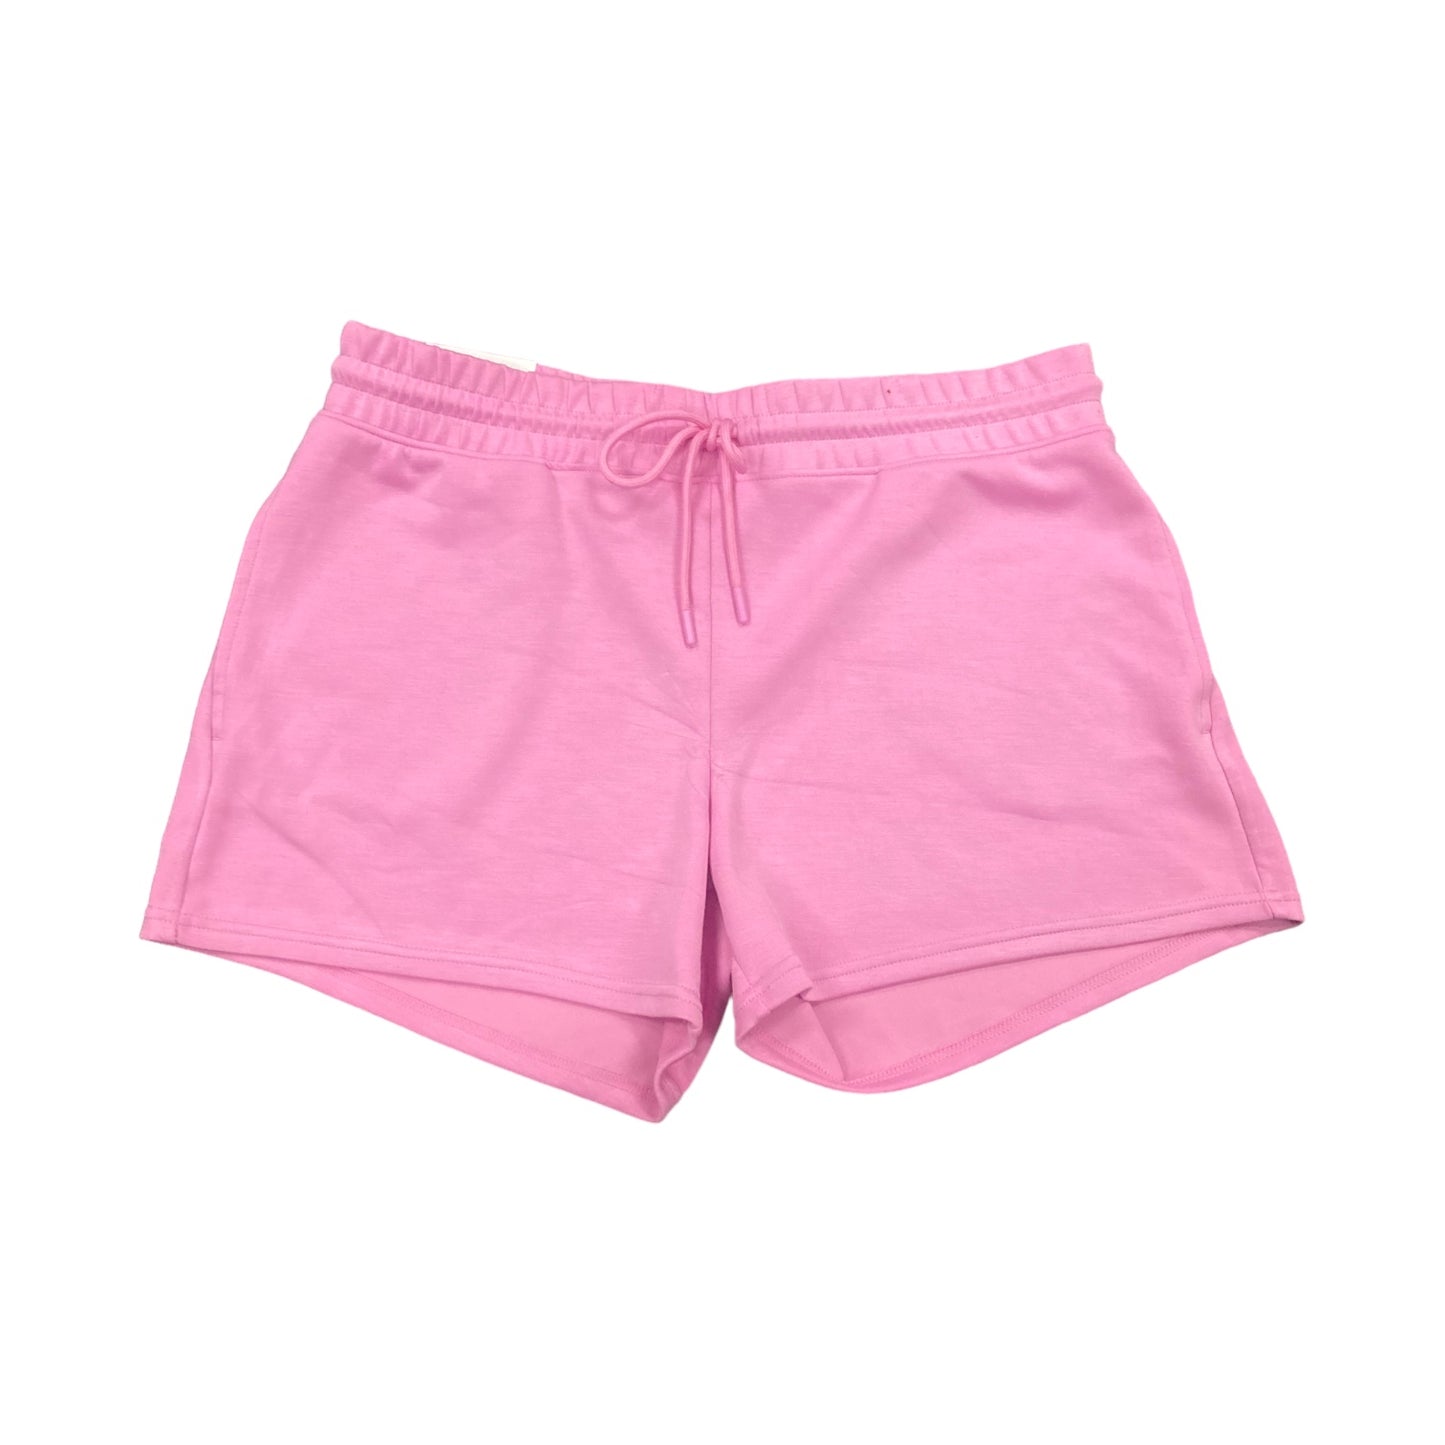 Member's Mark Ladies Soft Stretch Cotton Casual Lounge Short